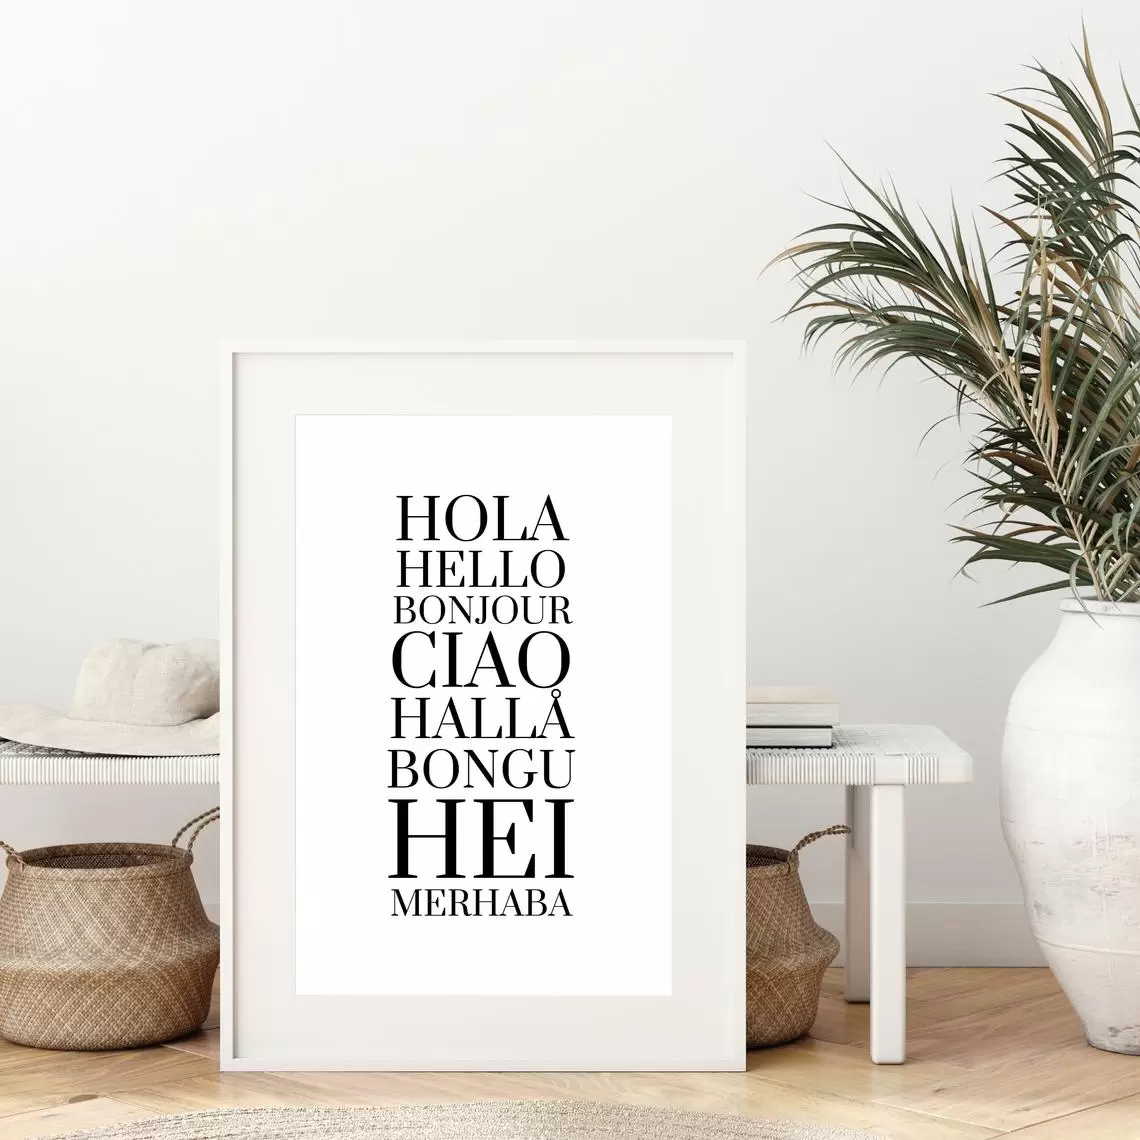 Gifts for language learners and travellers - Hello in different languages poster